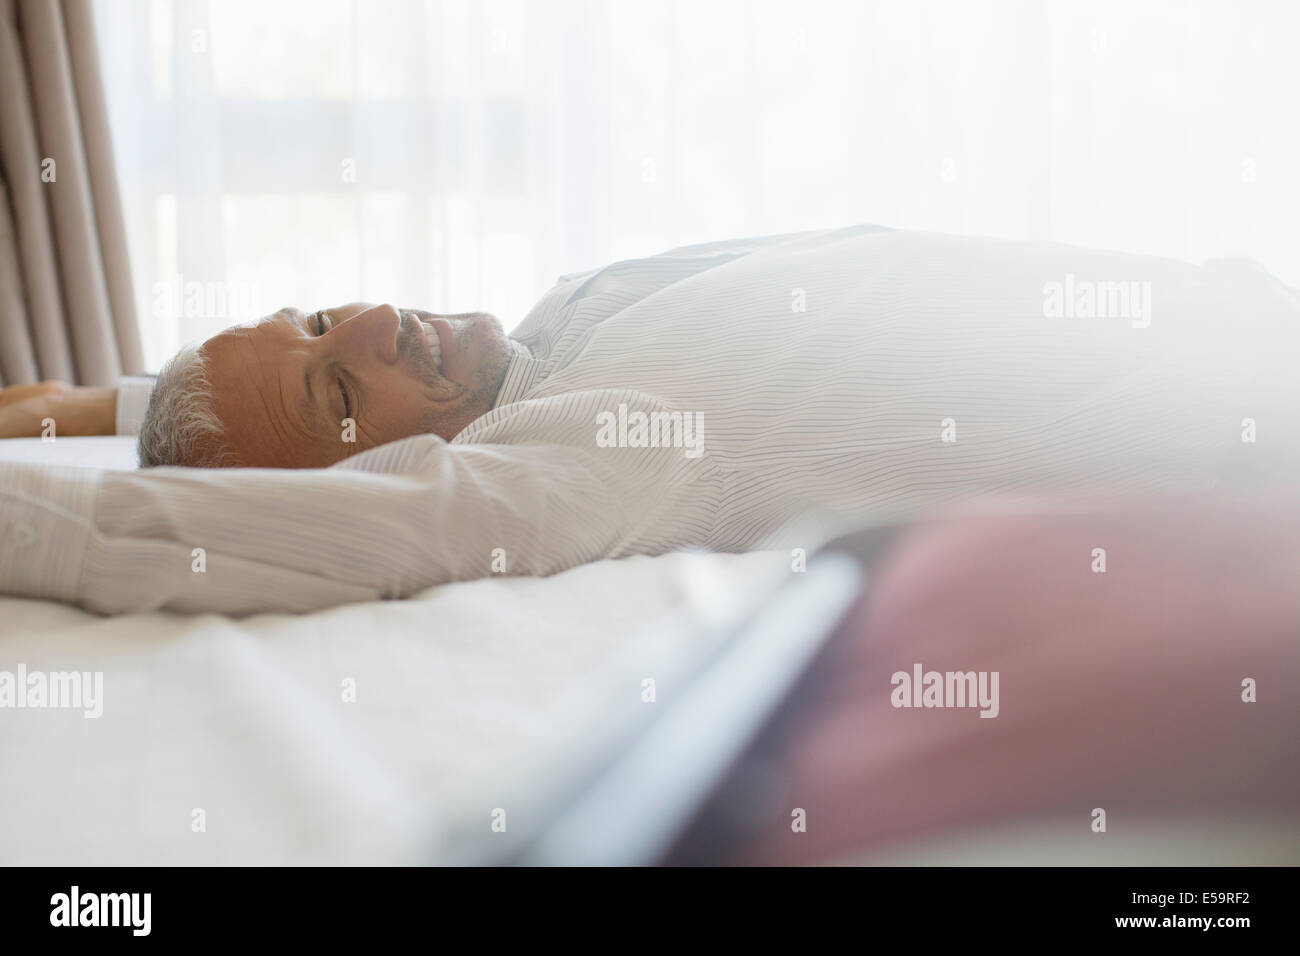 Woman laying on bed in hotel room Banque D'Images